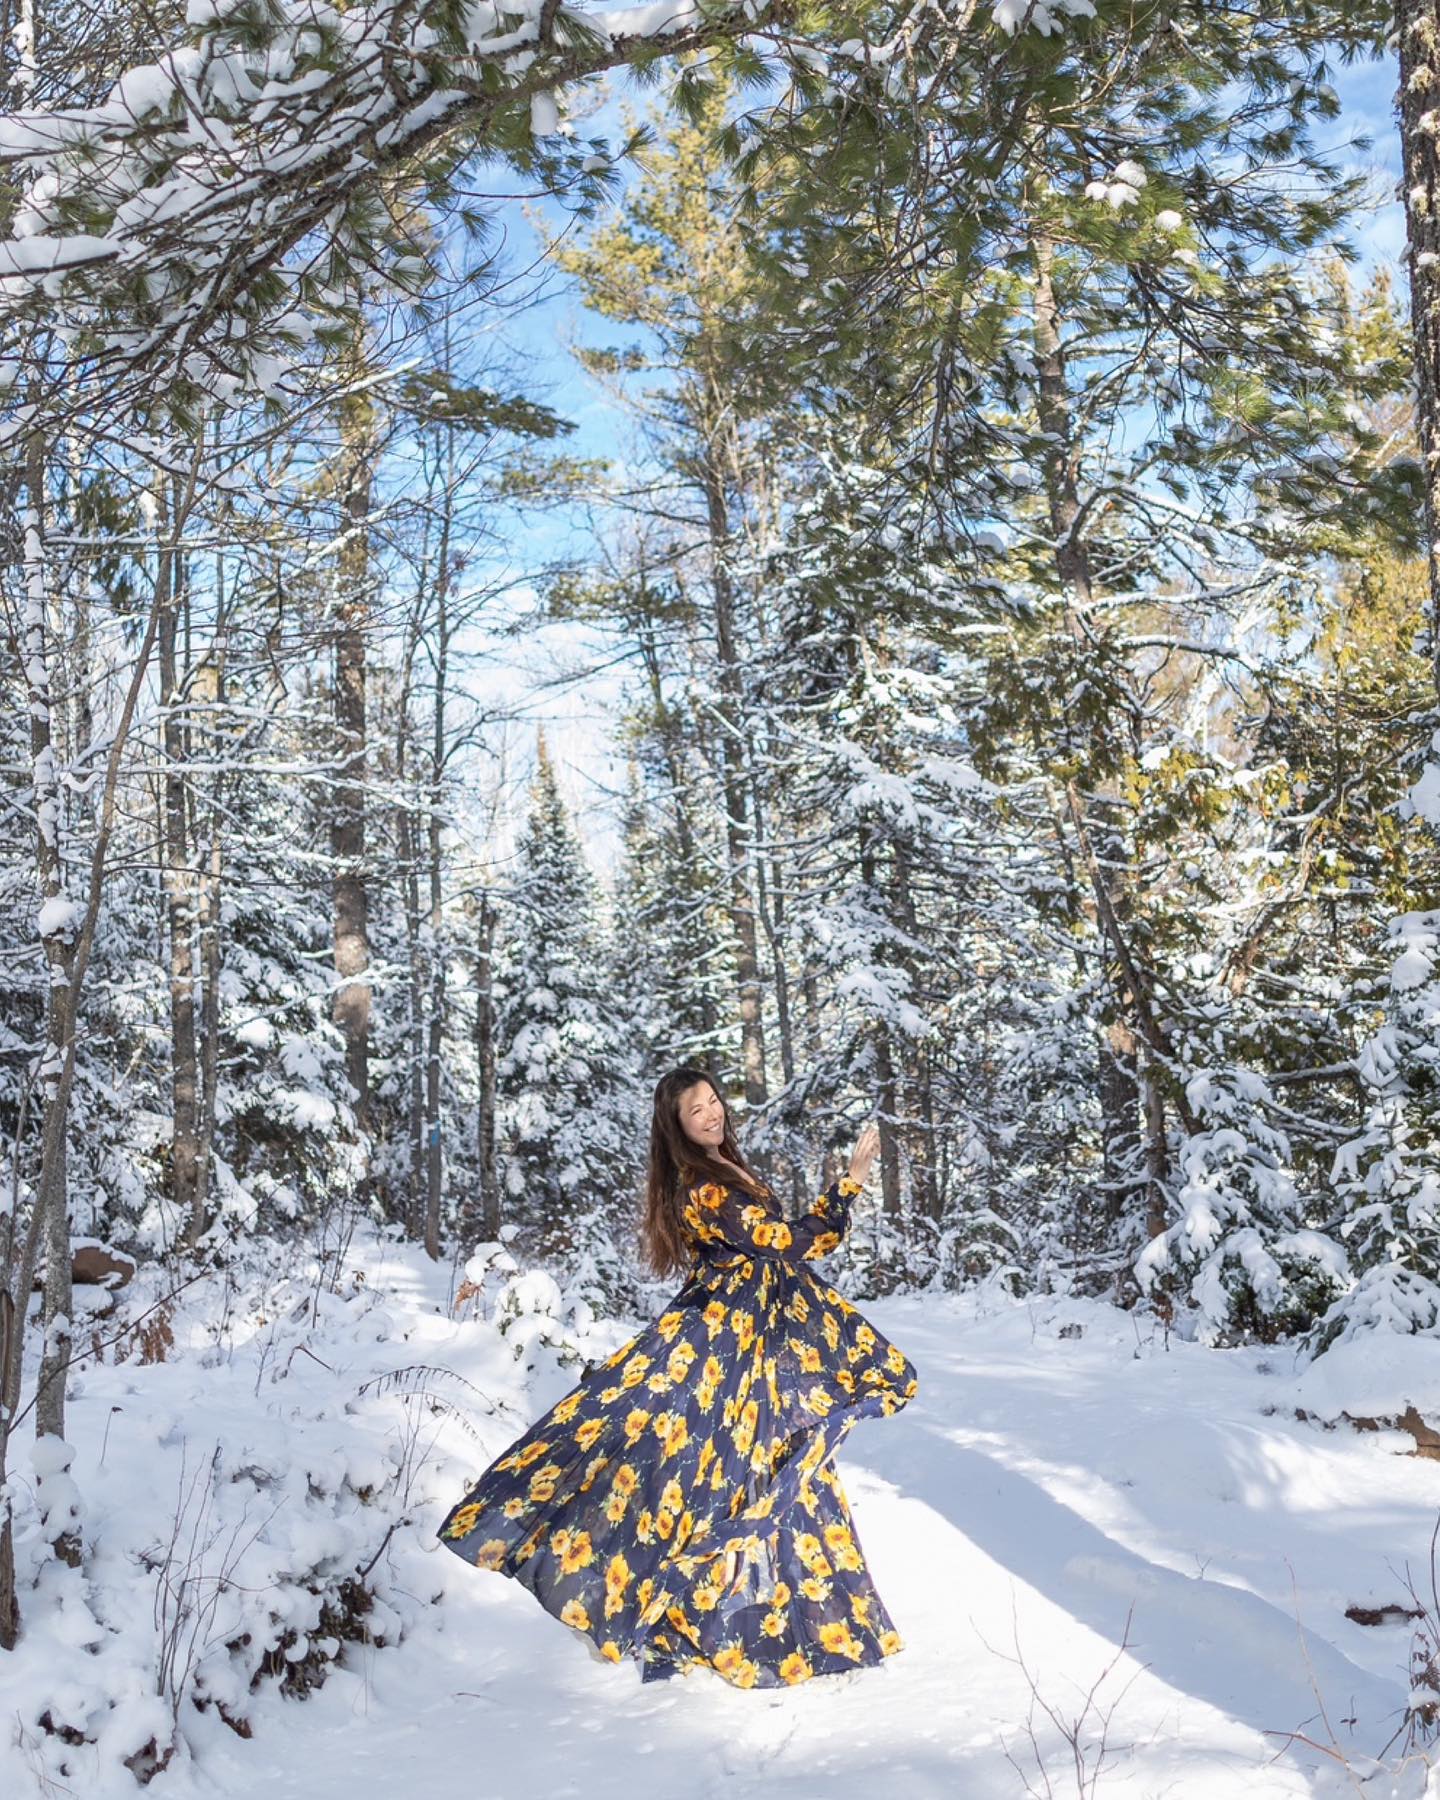 Olga Gamburg in the snowy woods spinning in chiffon gown in Marquette, Michigan